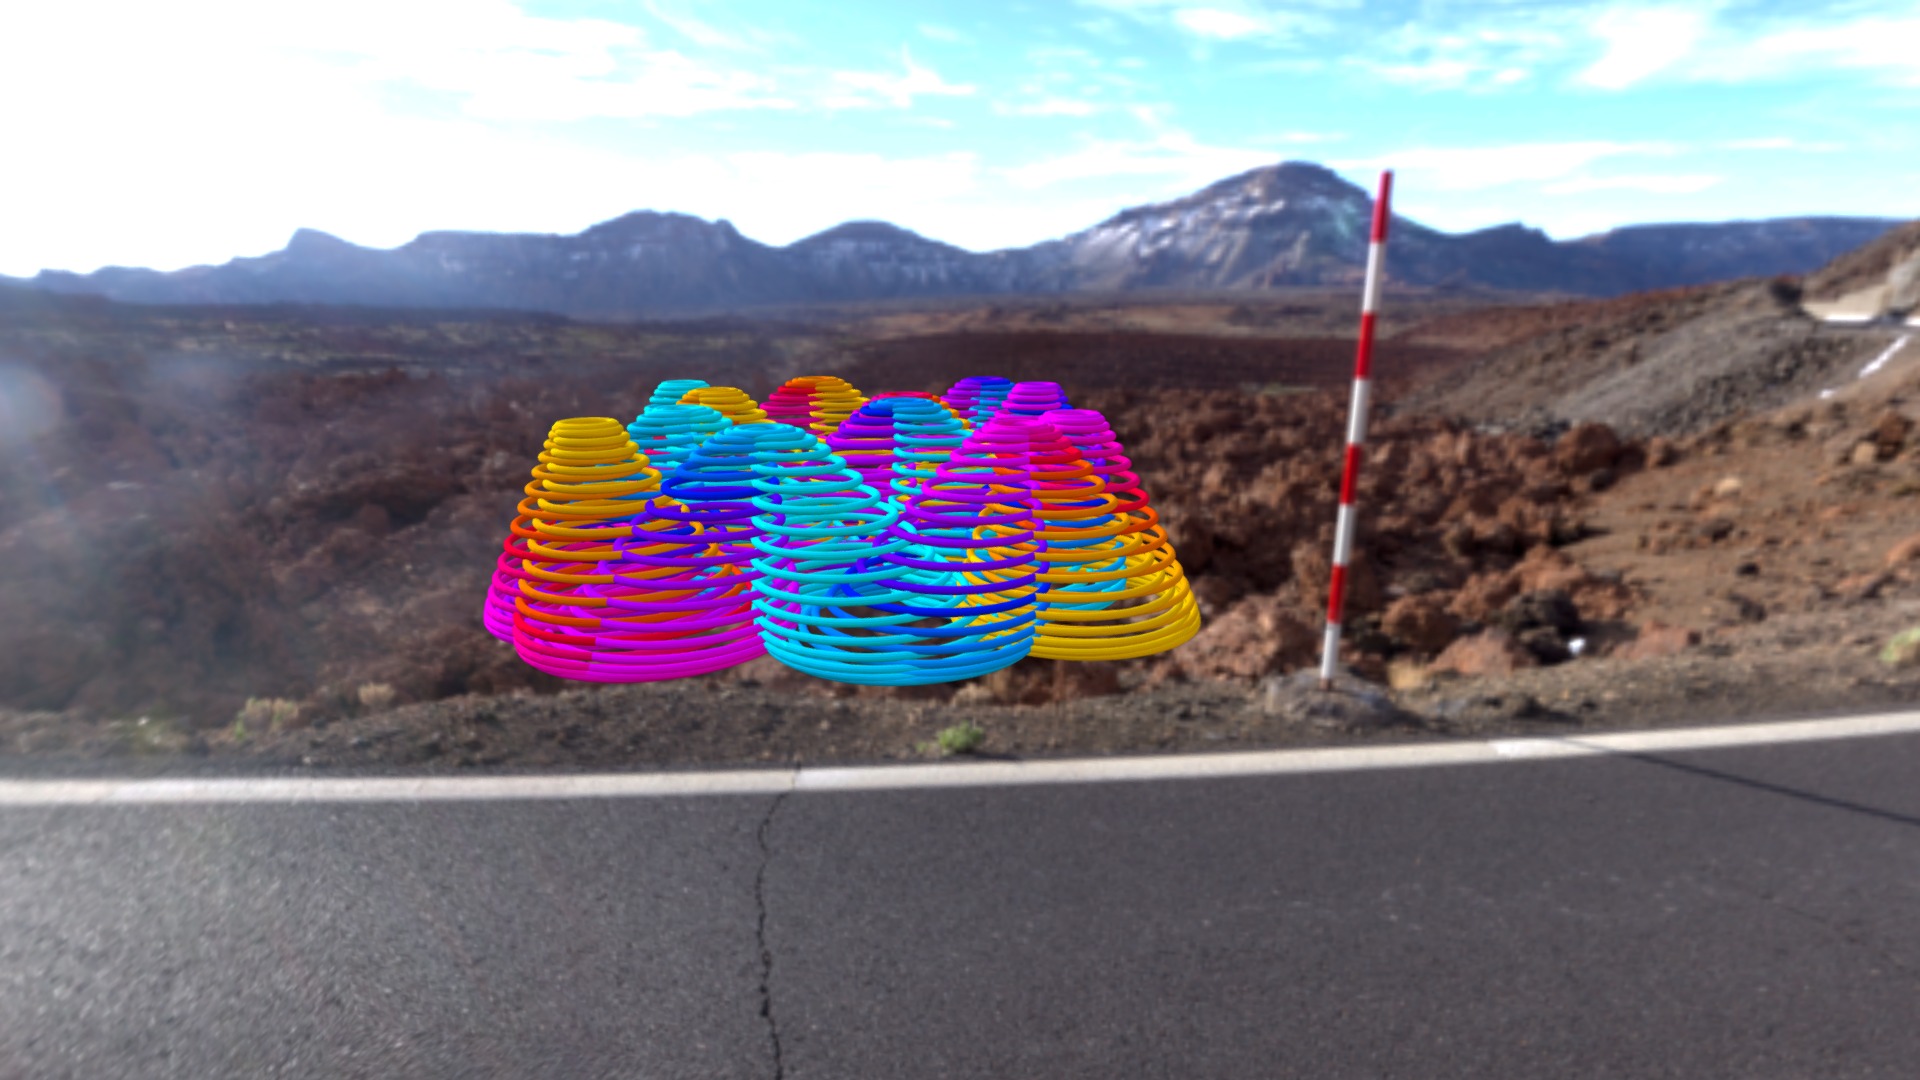 3D model springy mountains - This is a 3D model of the springy mountains. The 3D model is about a road with a rainbow painted on it and mountains in the background.